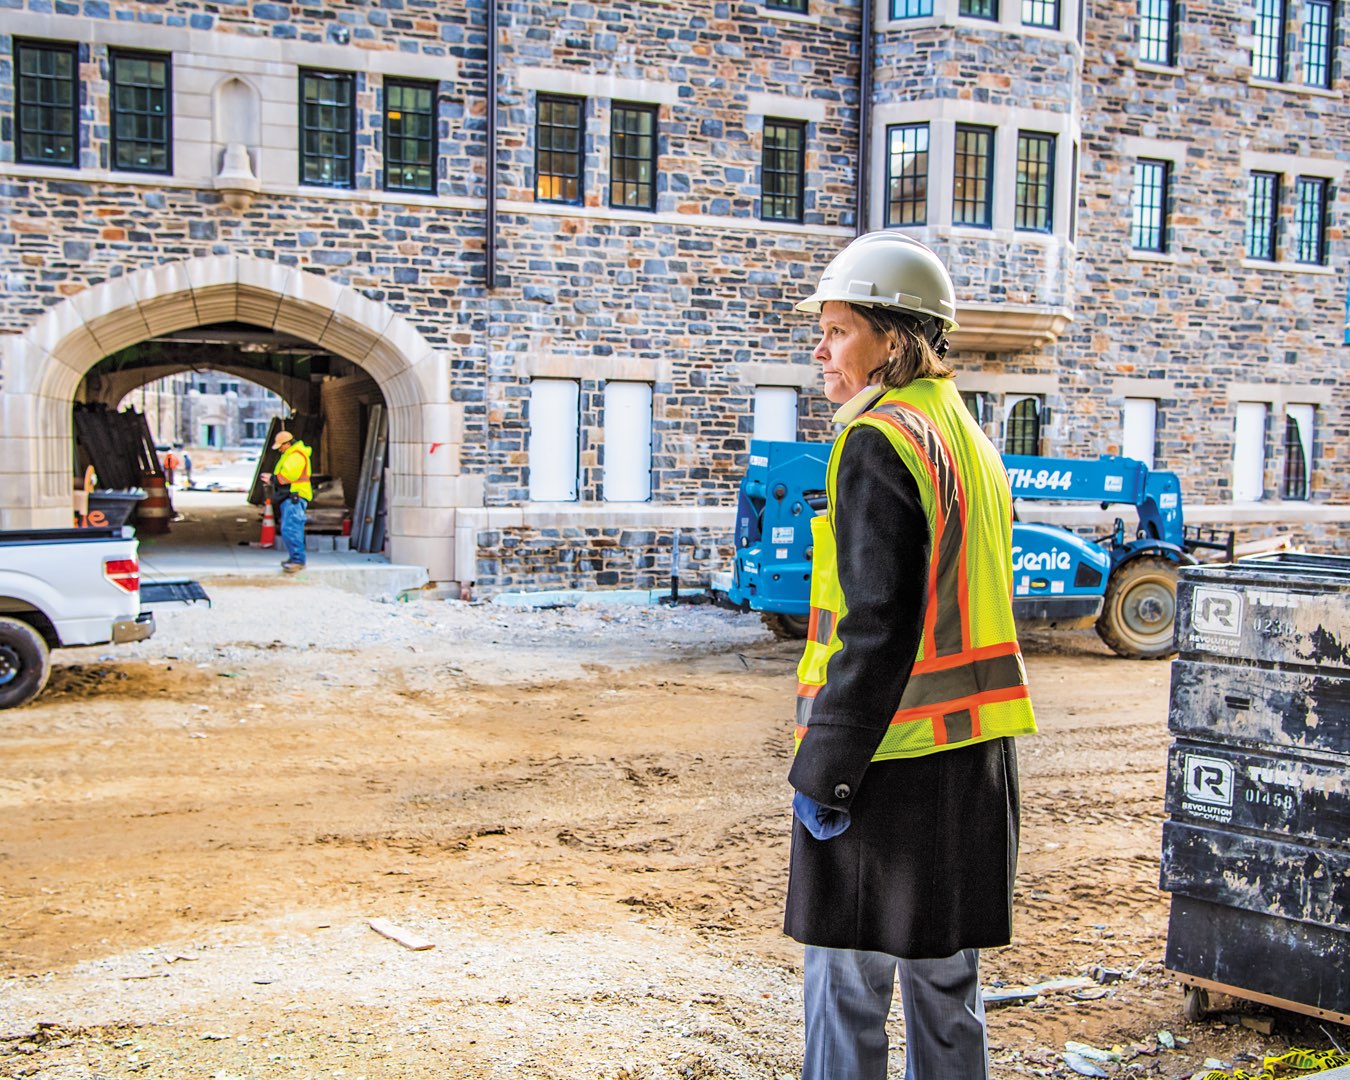 Marilou Smith surveys progress The Commons residence halls site, with construction workers and vehicles in the background